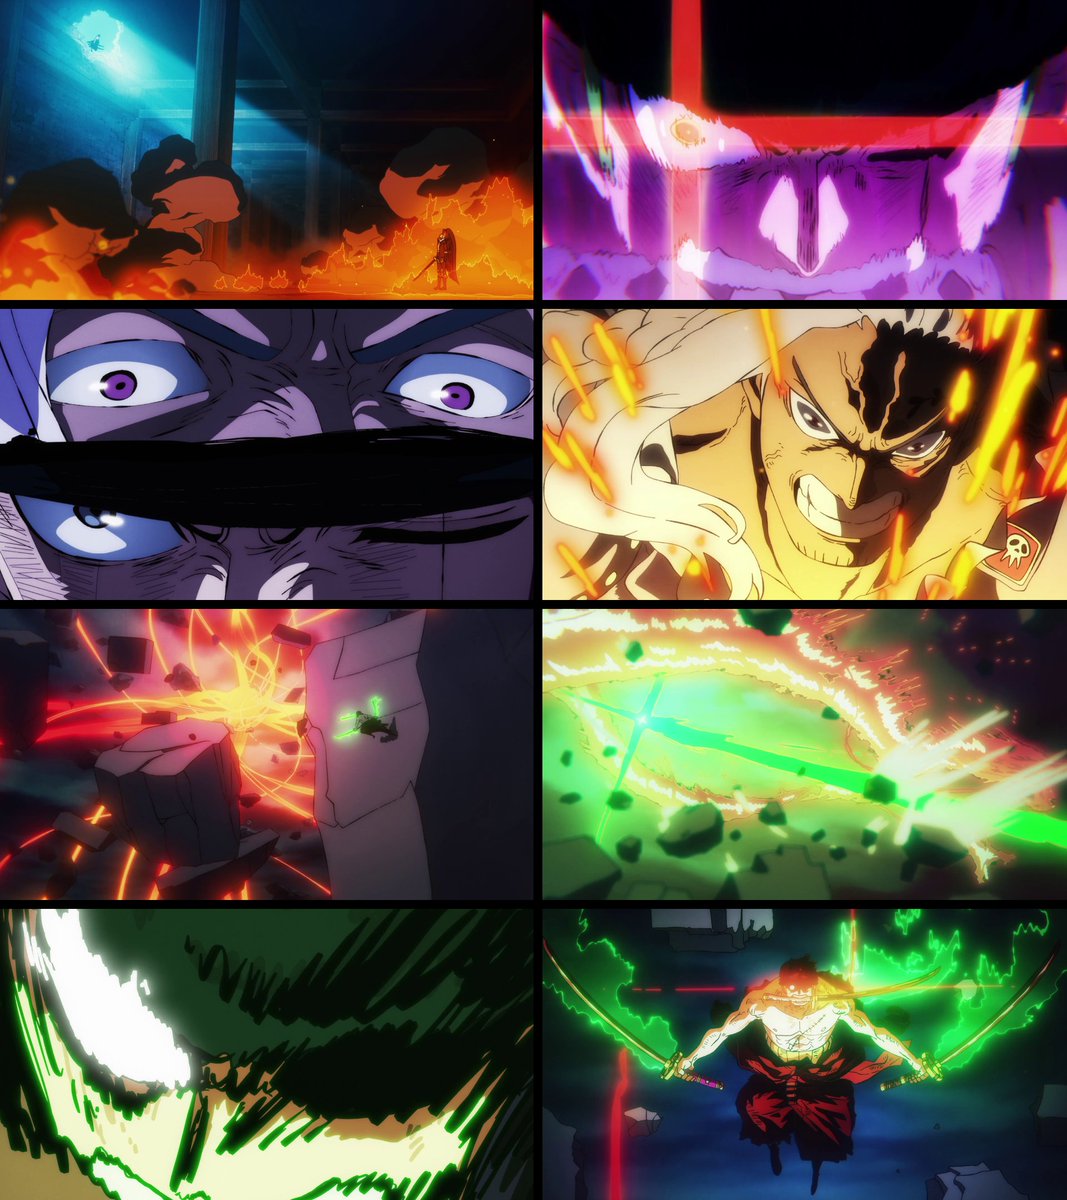 Jesus. FUCKING. Christ. Without a doubt, one of the best episodes of the Wano arc and the BEST action episode from the series. #1062 was un-fucking-real. Tanaka's direction, Ishizuka's grand and spacious board, the animation, the OST... Absolute CINEMA.

#OnePiece #OnePiece1062